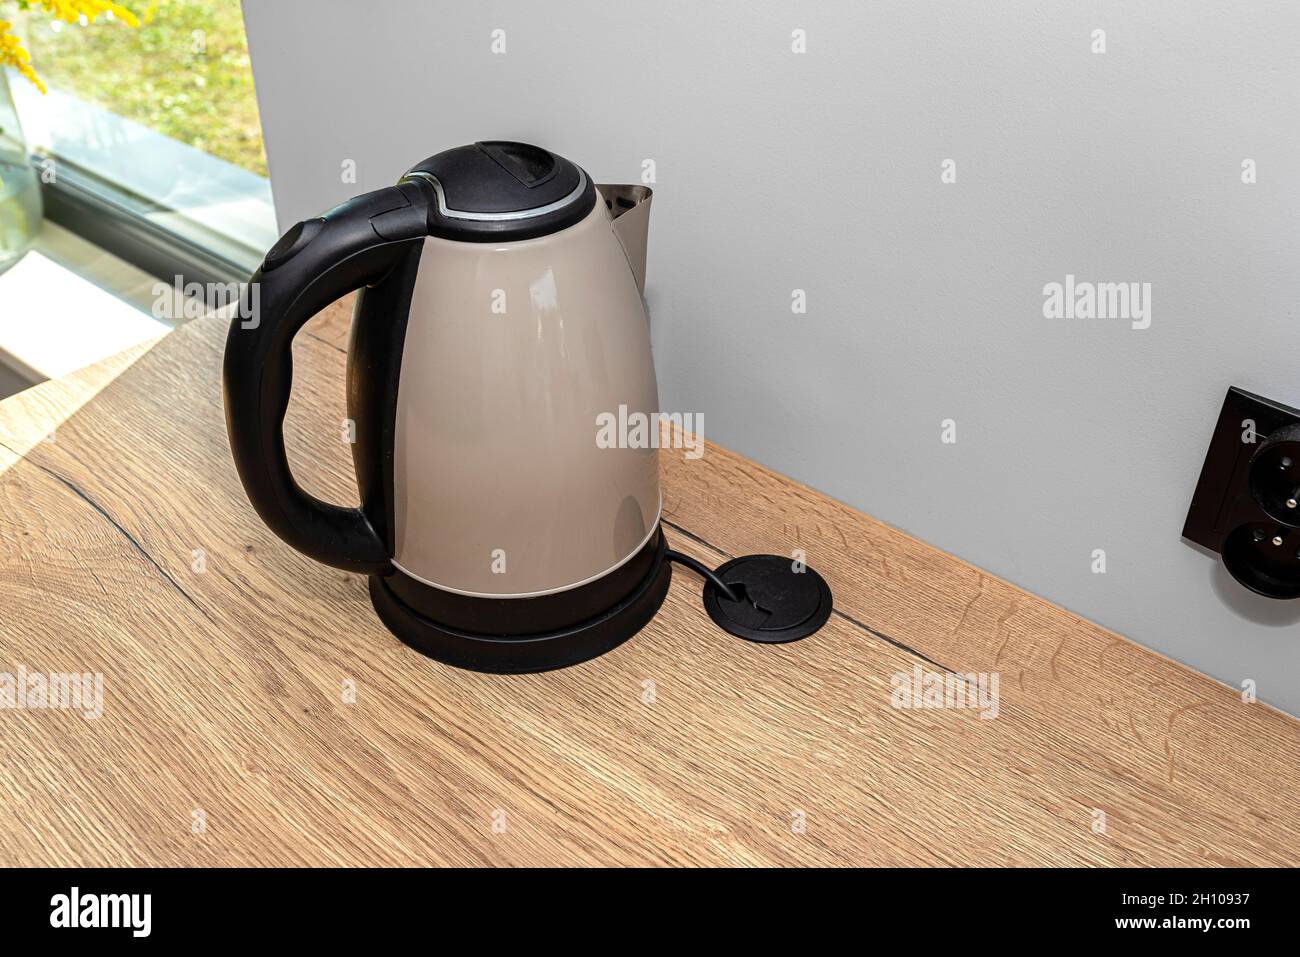 https://c8.alamy.com/comp/2H10937/an-electric-kettle-standing-on-the-countertop-on-the-kitchen-cabinets-visible-hole-in-the-table-top-through-which-the-electric-cable-goes-2H10937.jpg